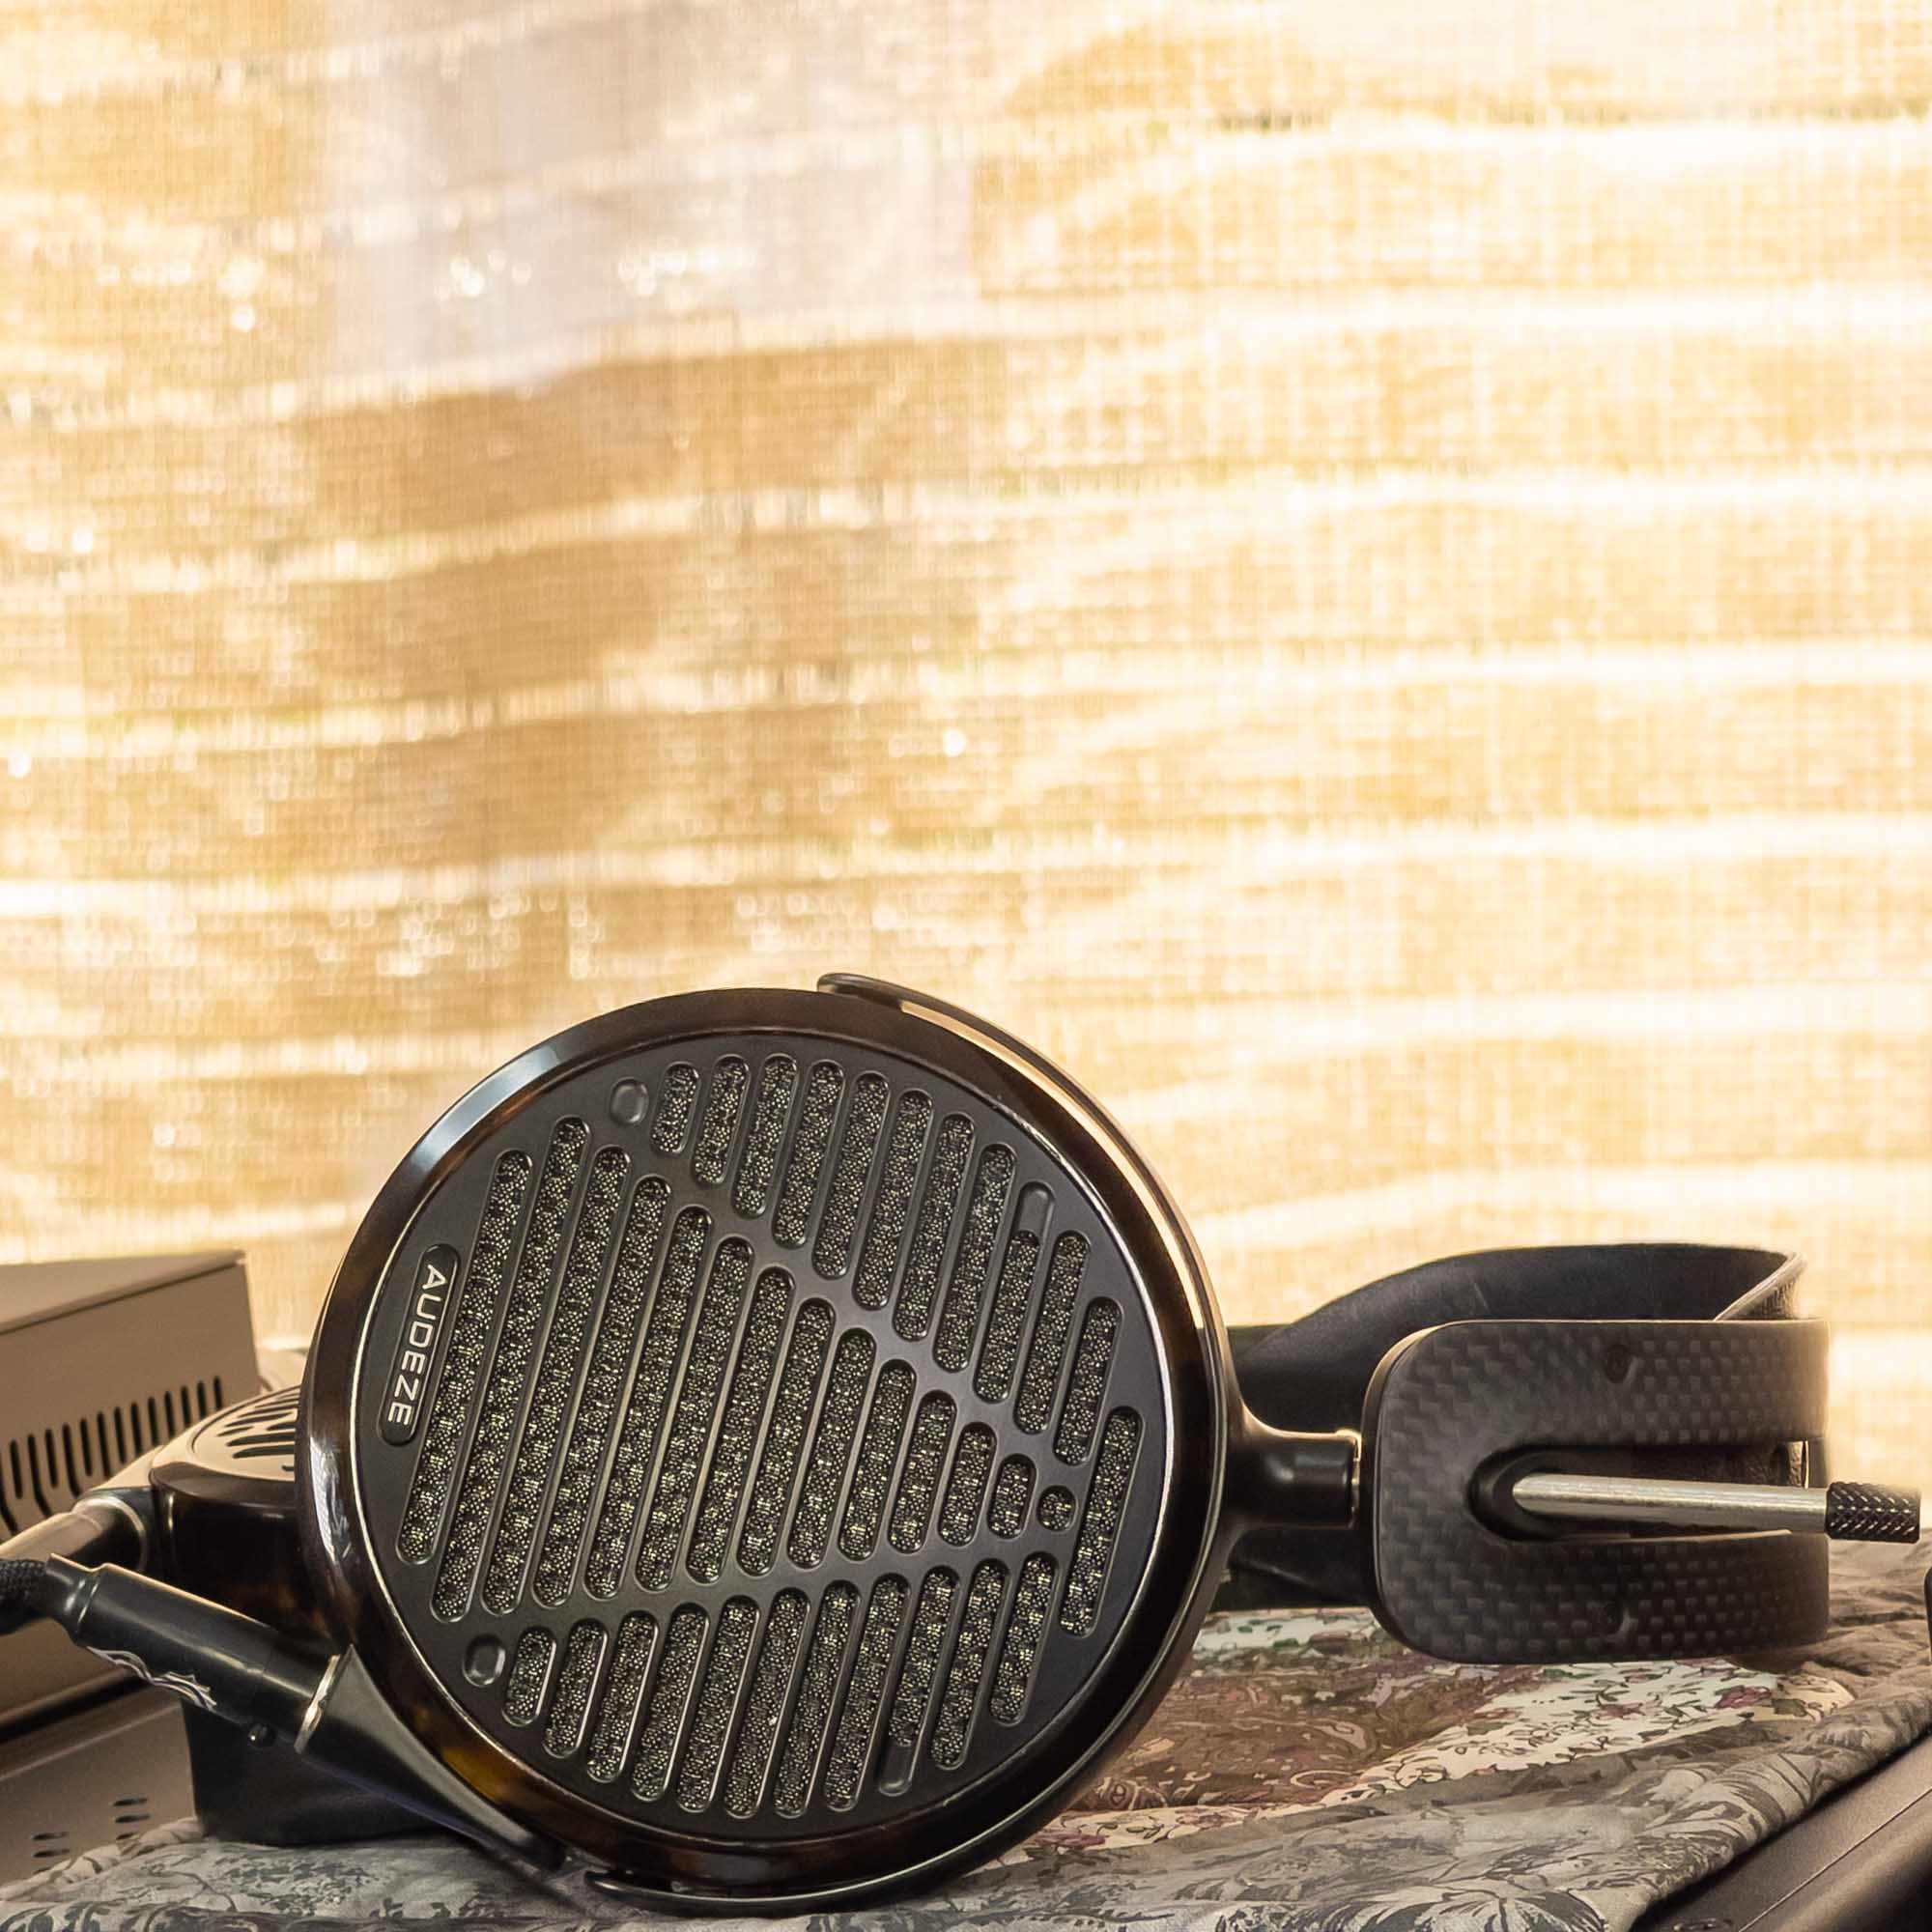 Audeze LCD-5 Review by Amos (Currawong)